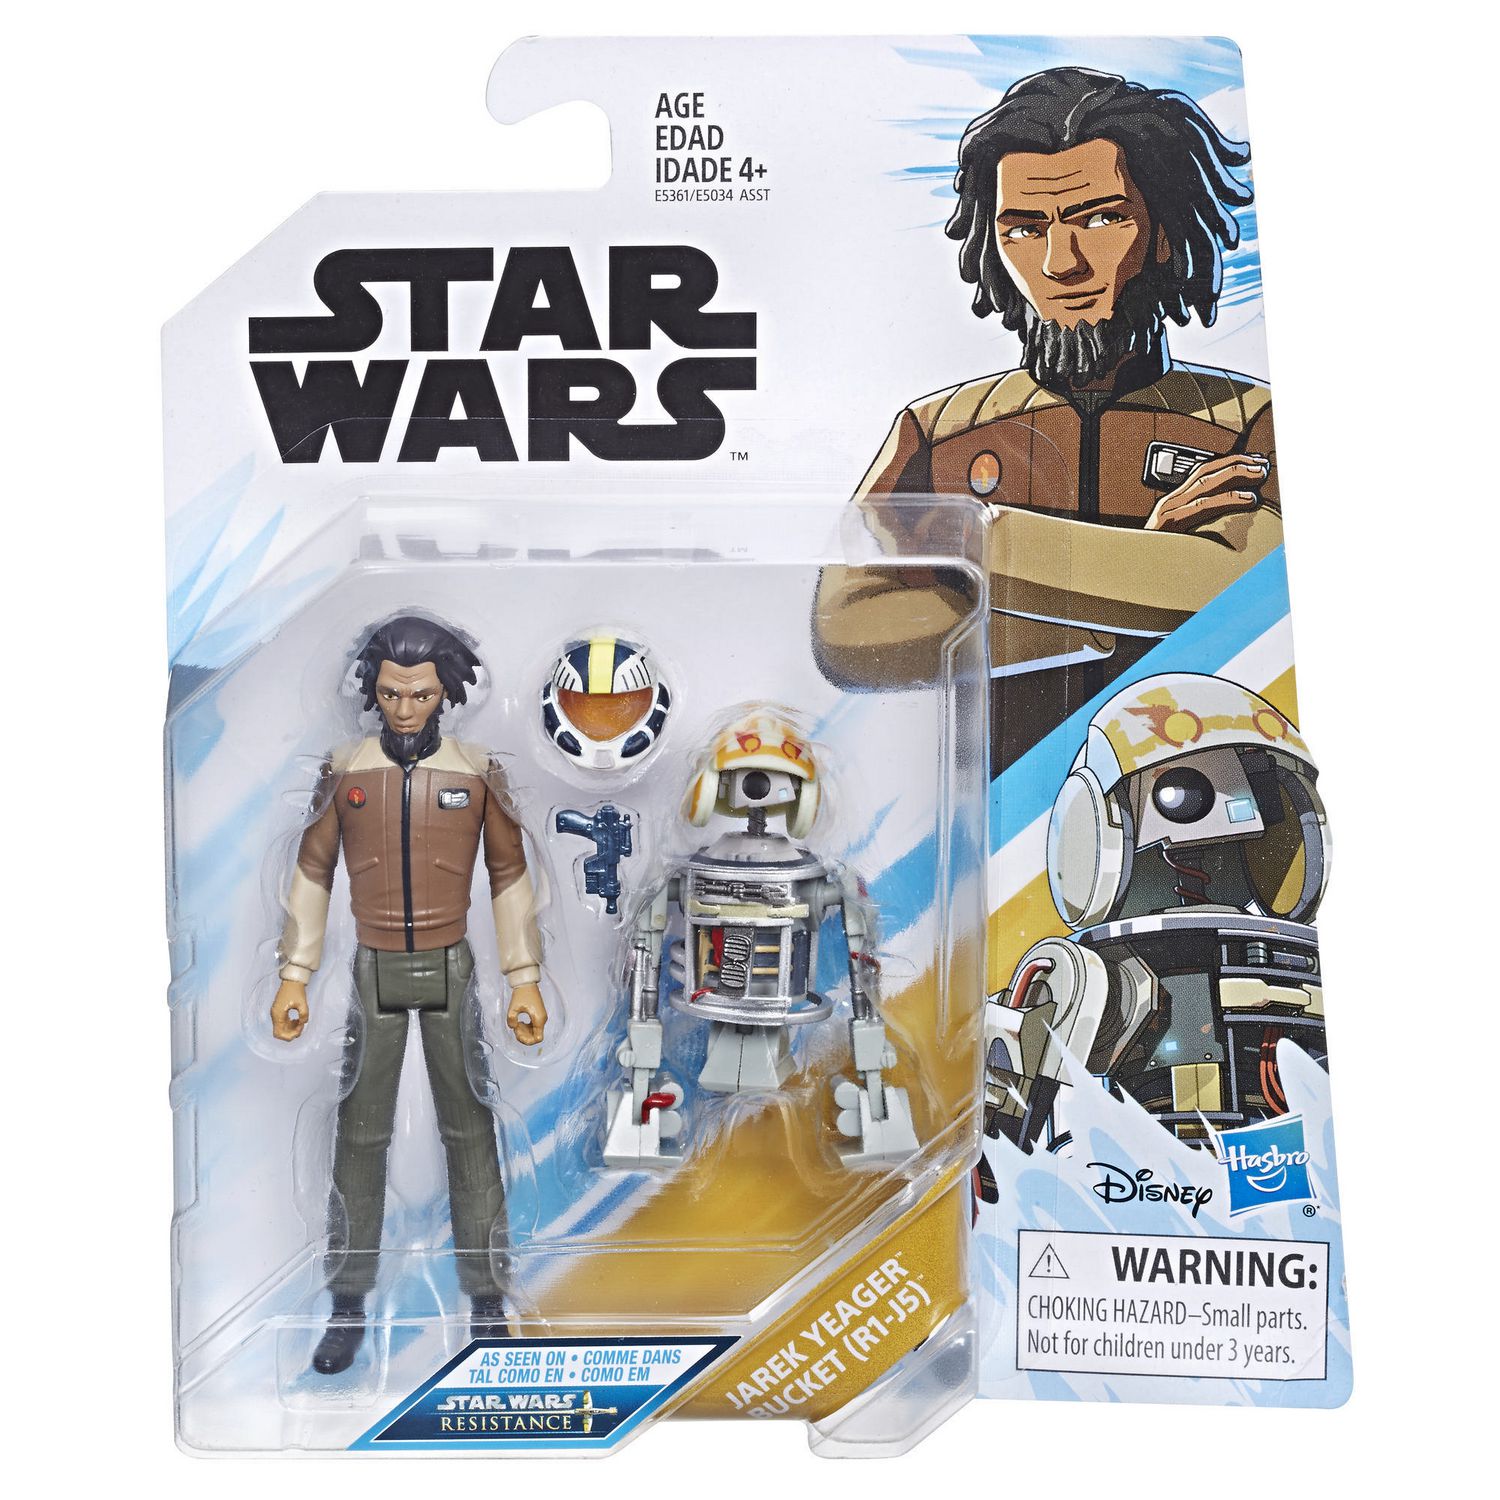 Star Wars Resistance Animated Series 3.75-inch Poe Dameron and BB-8 Figure 2-Pac 